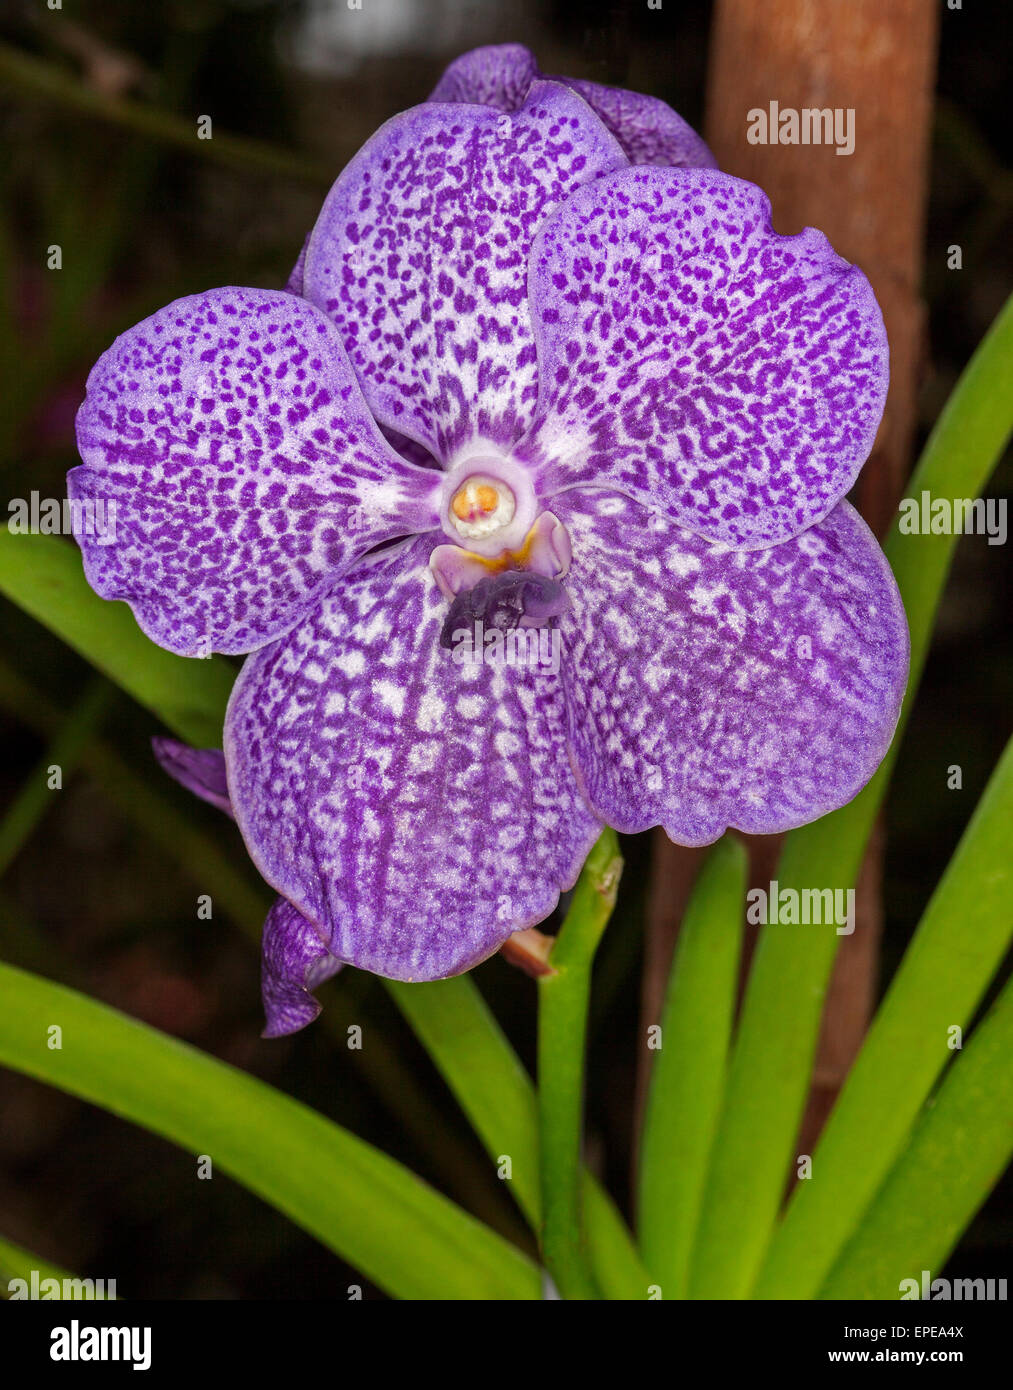 Large, unusual and spectacular purple / blue and white speckled flower of orchid Vanda coerulea hybrid 'Arambeen'with green leaves on dark background Stock Photo